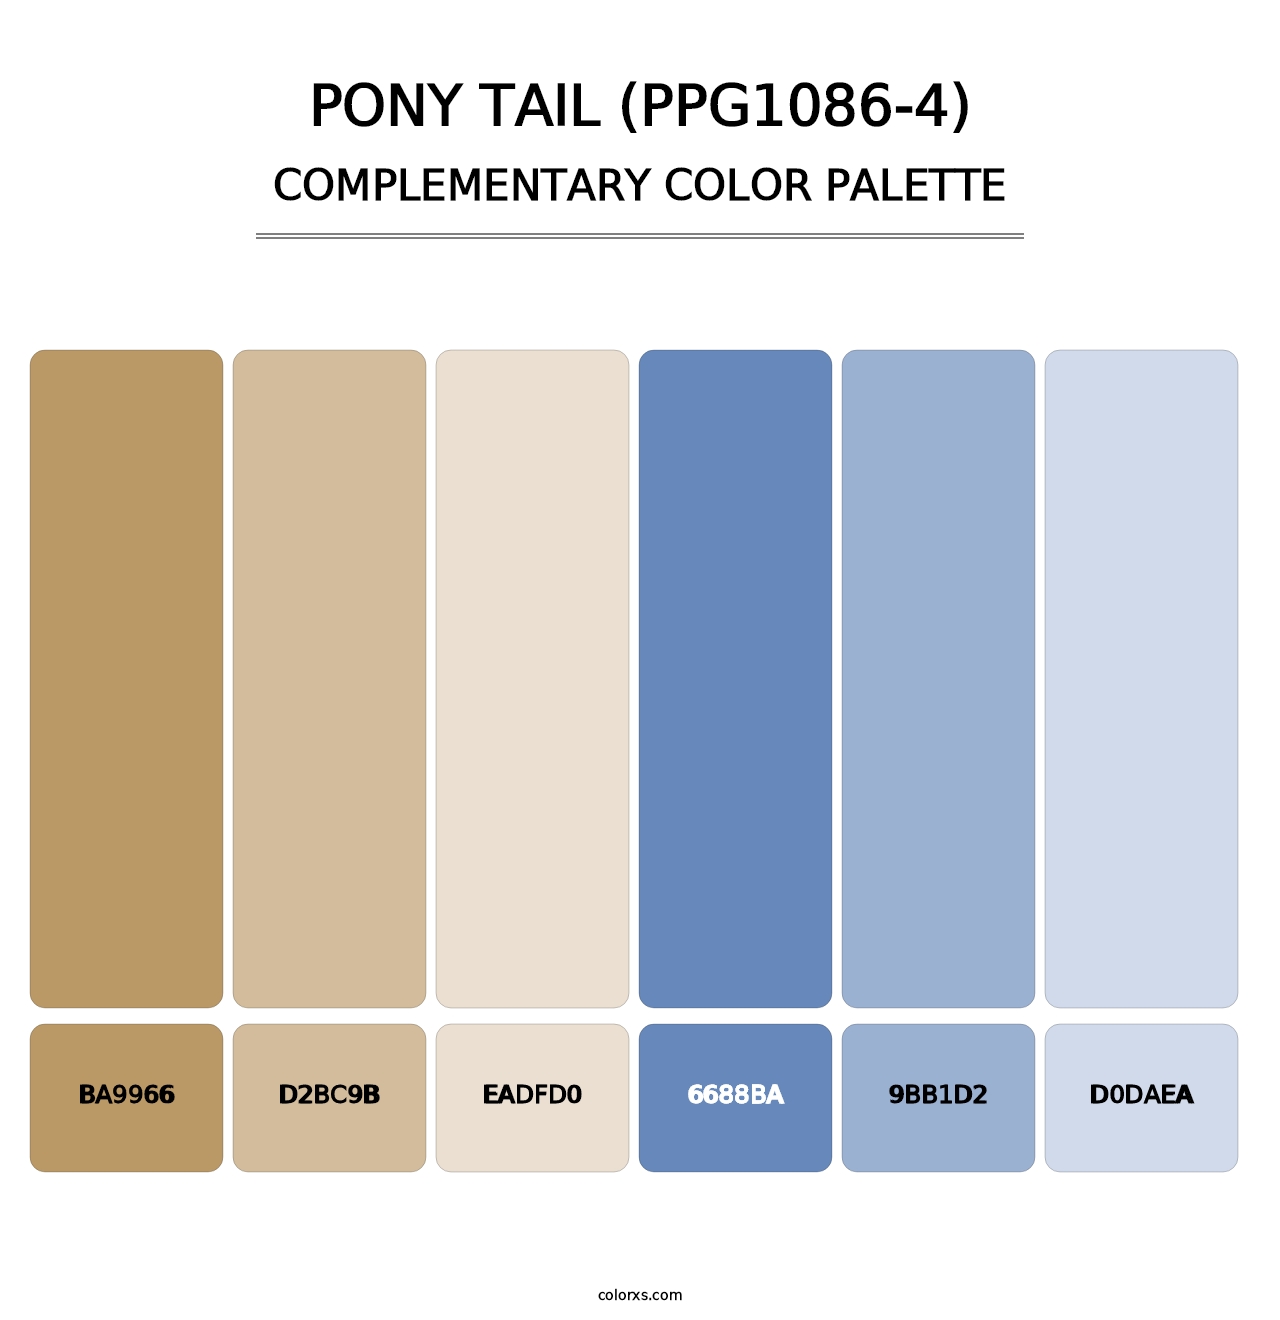 Pony Tail (PPG1086-4) - Complementary Color Palette